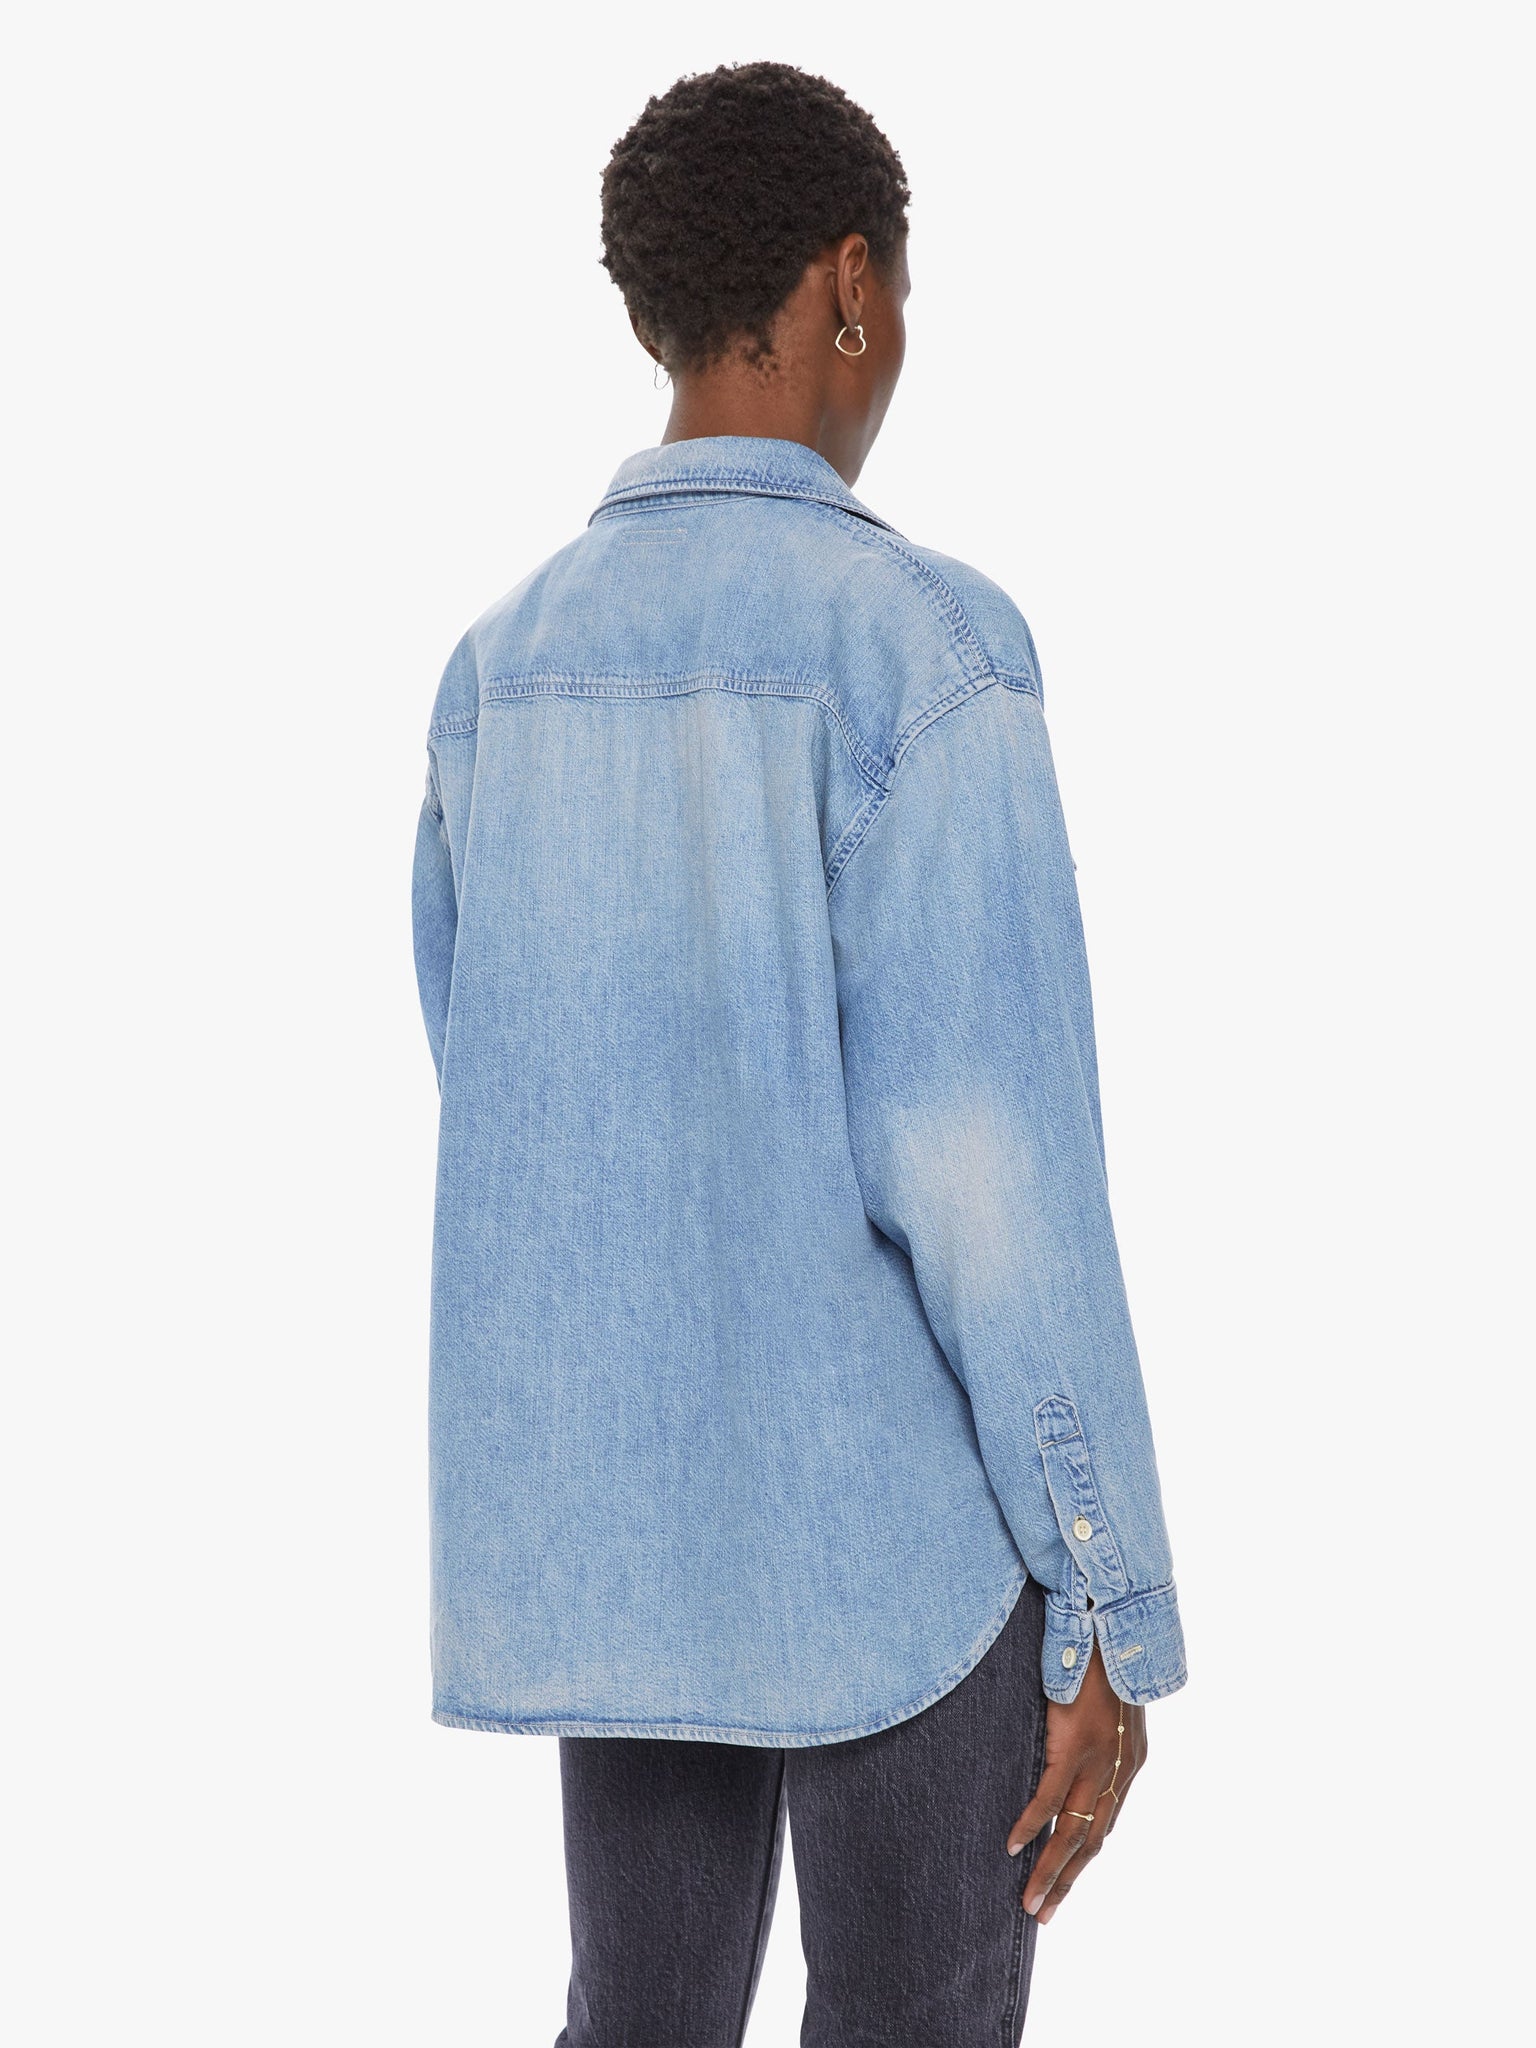 Fly above the rest denim shirt